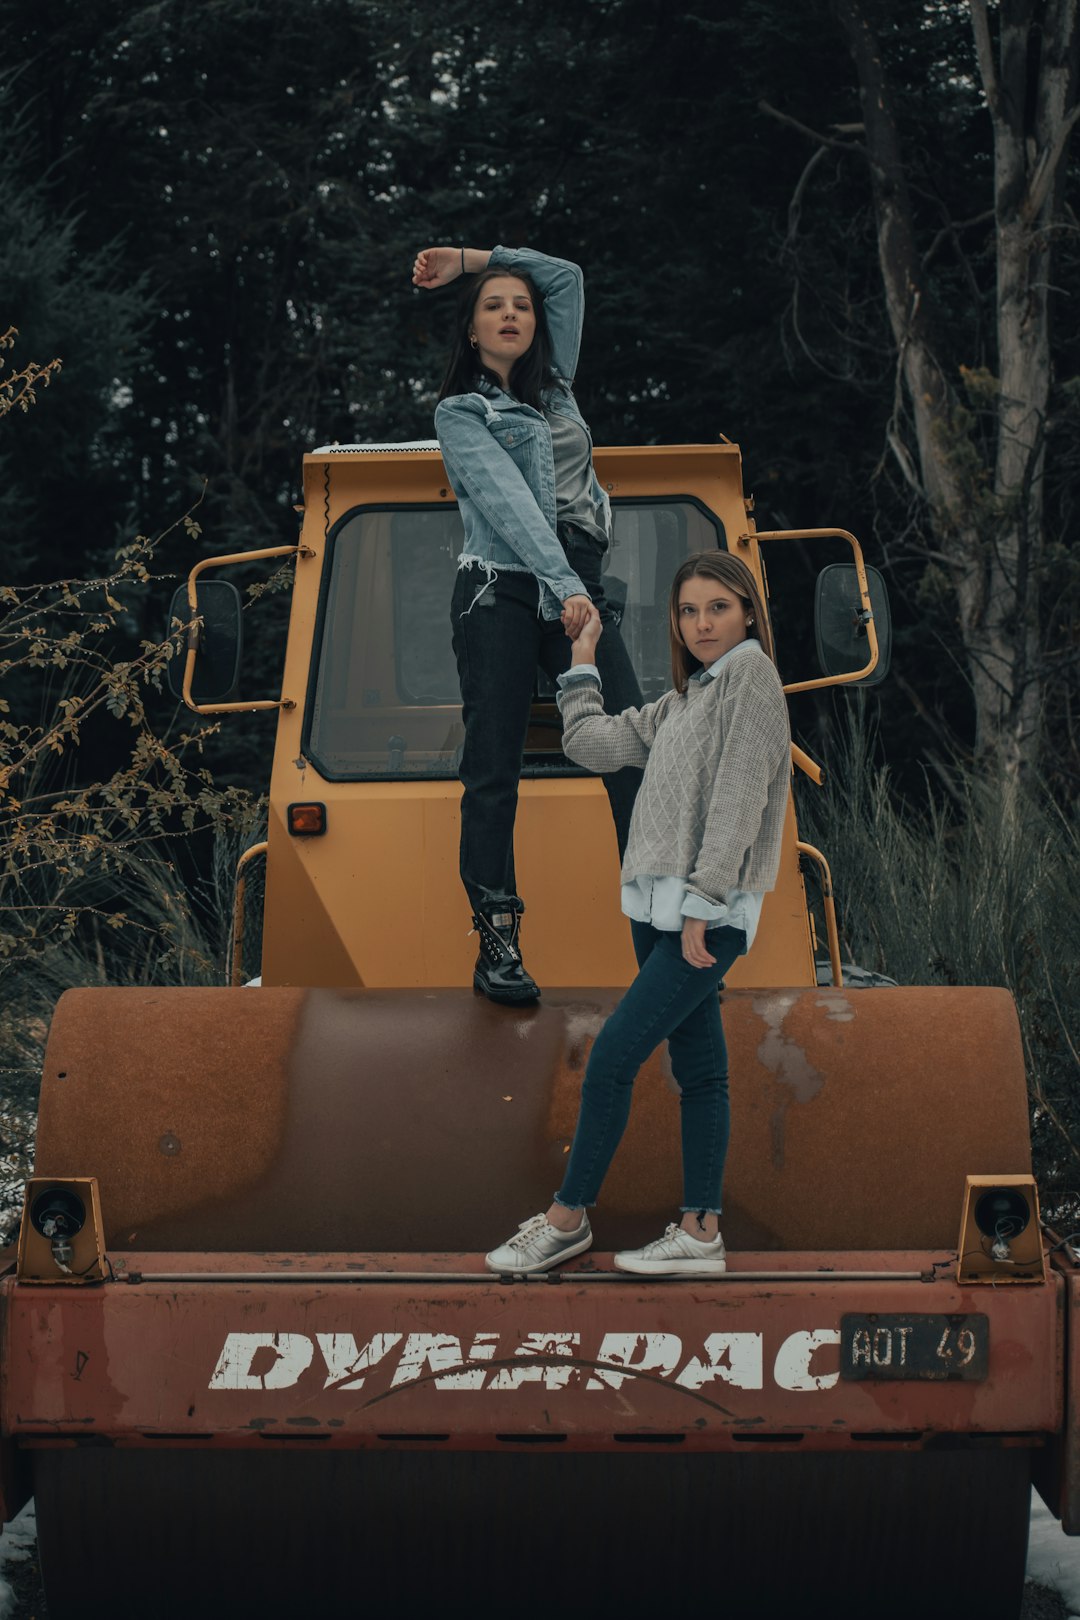 woman in gray jacket and blue denim jeans standing on orange truck